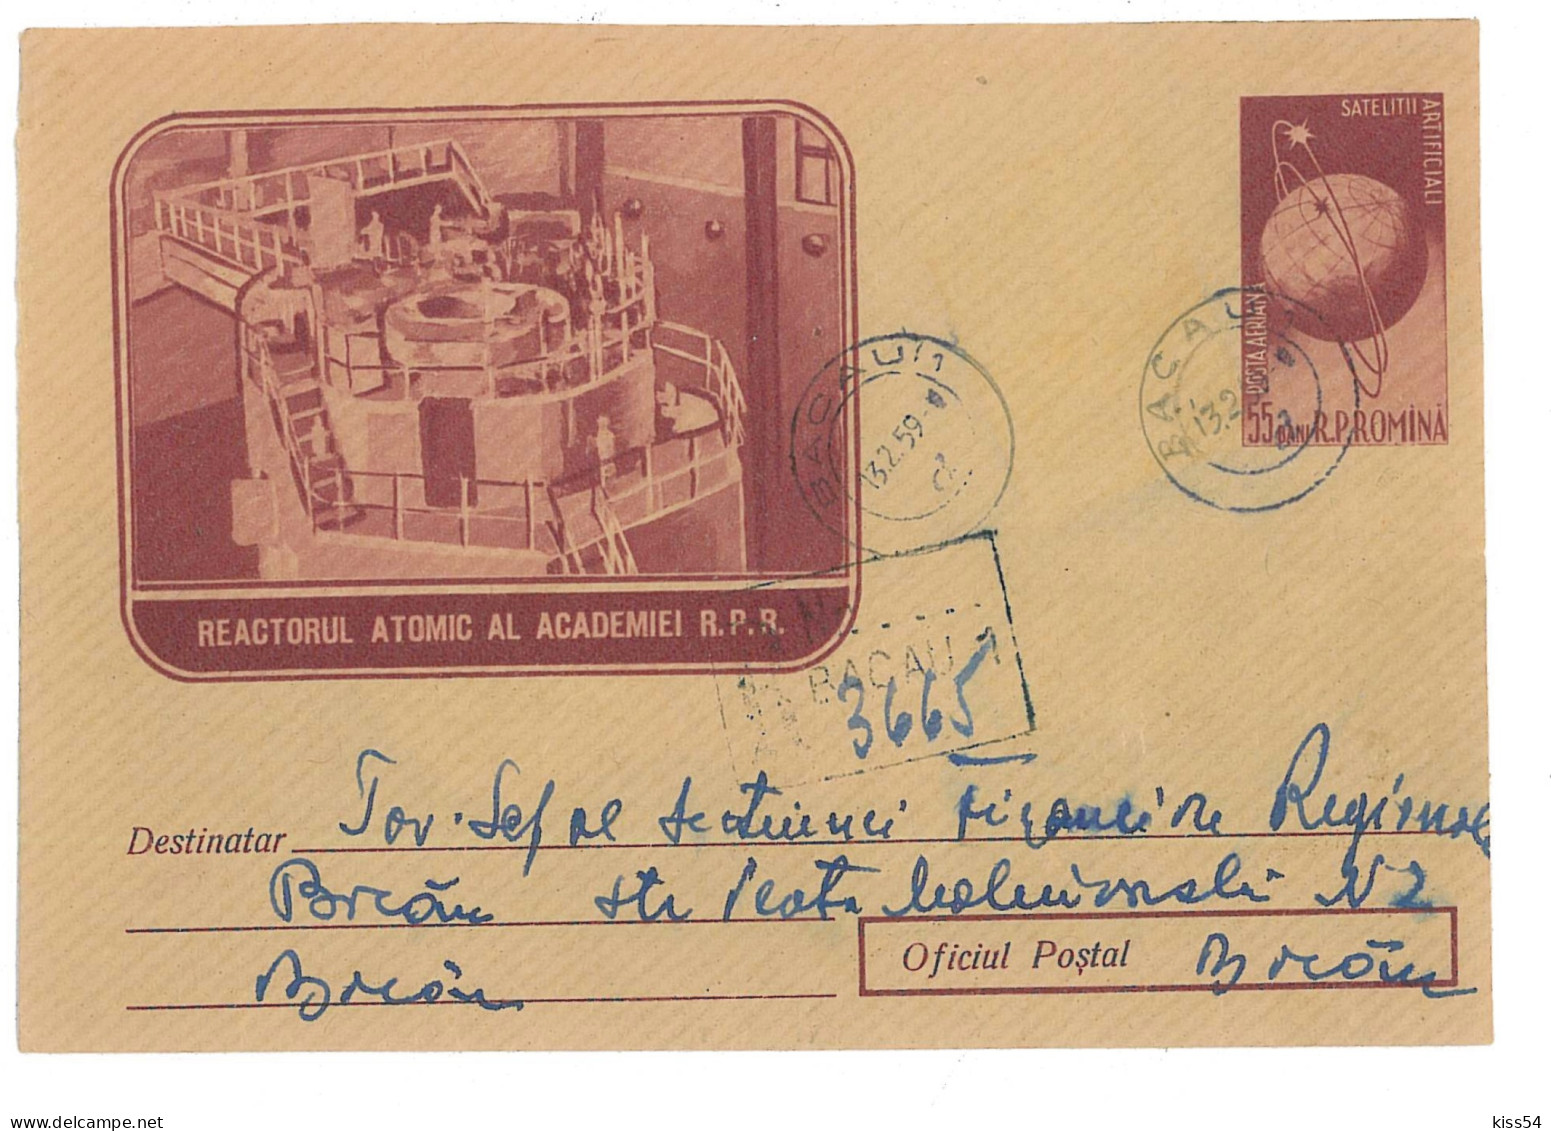 IP 58 A - 0119a-a ENERGY, Atomic Reactor, Romania - REGISTERED Stationery - Used - 1958 - Atom